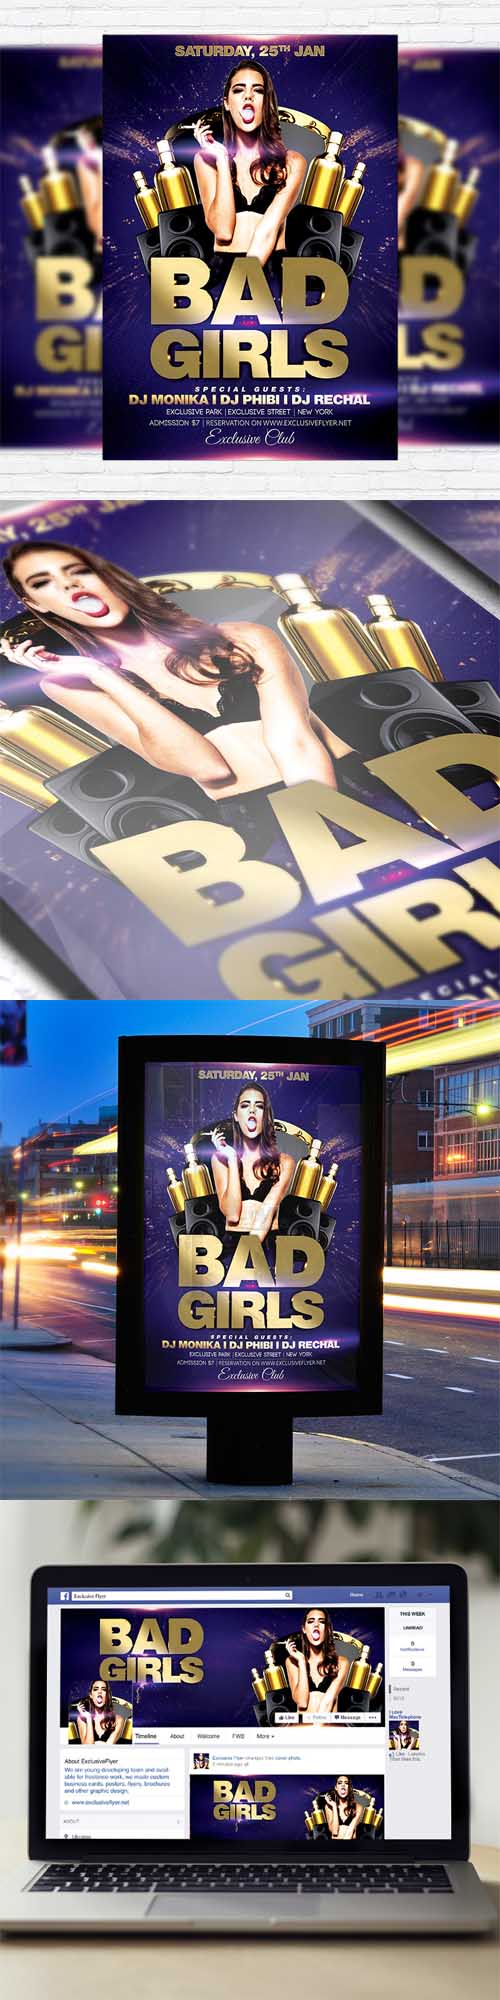 Flyer Template - Bad Girls + Facebook Cover